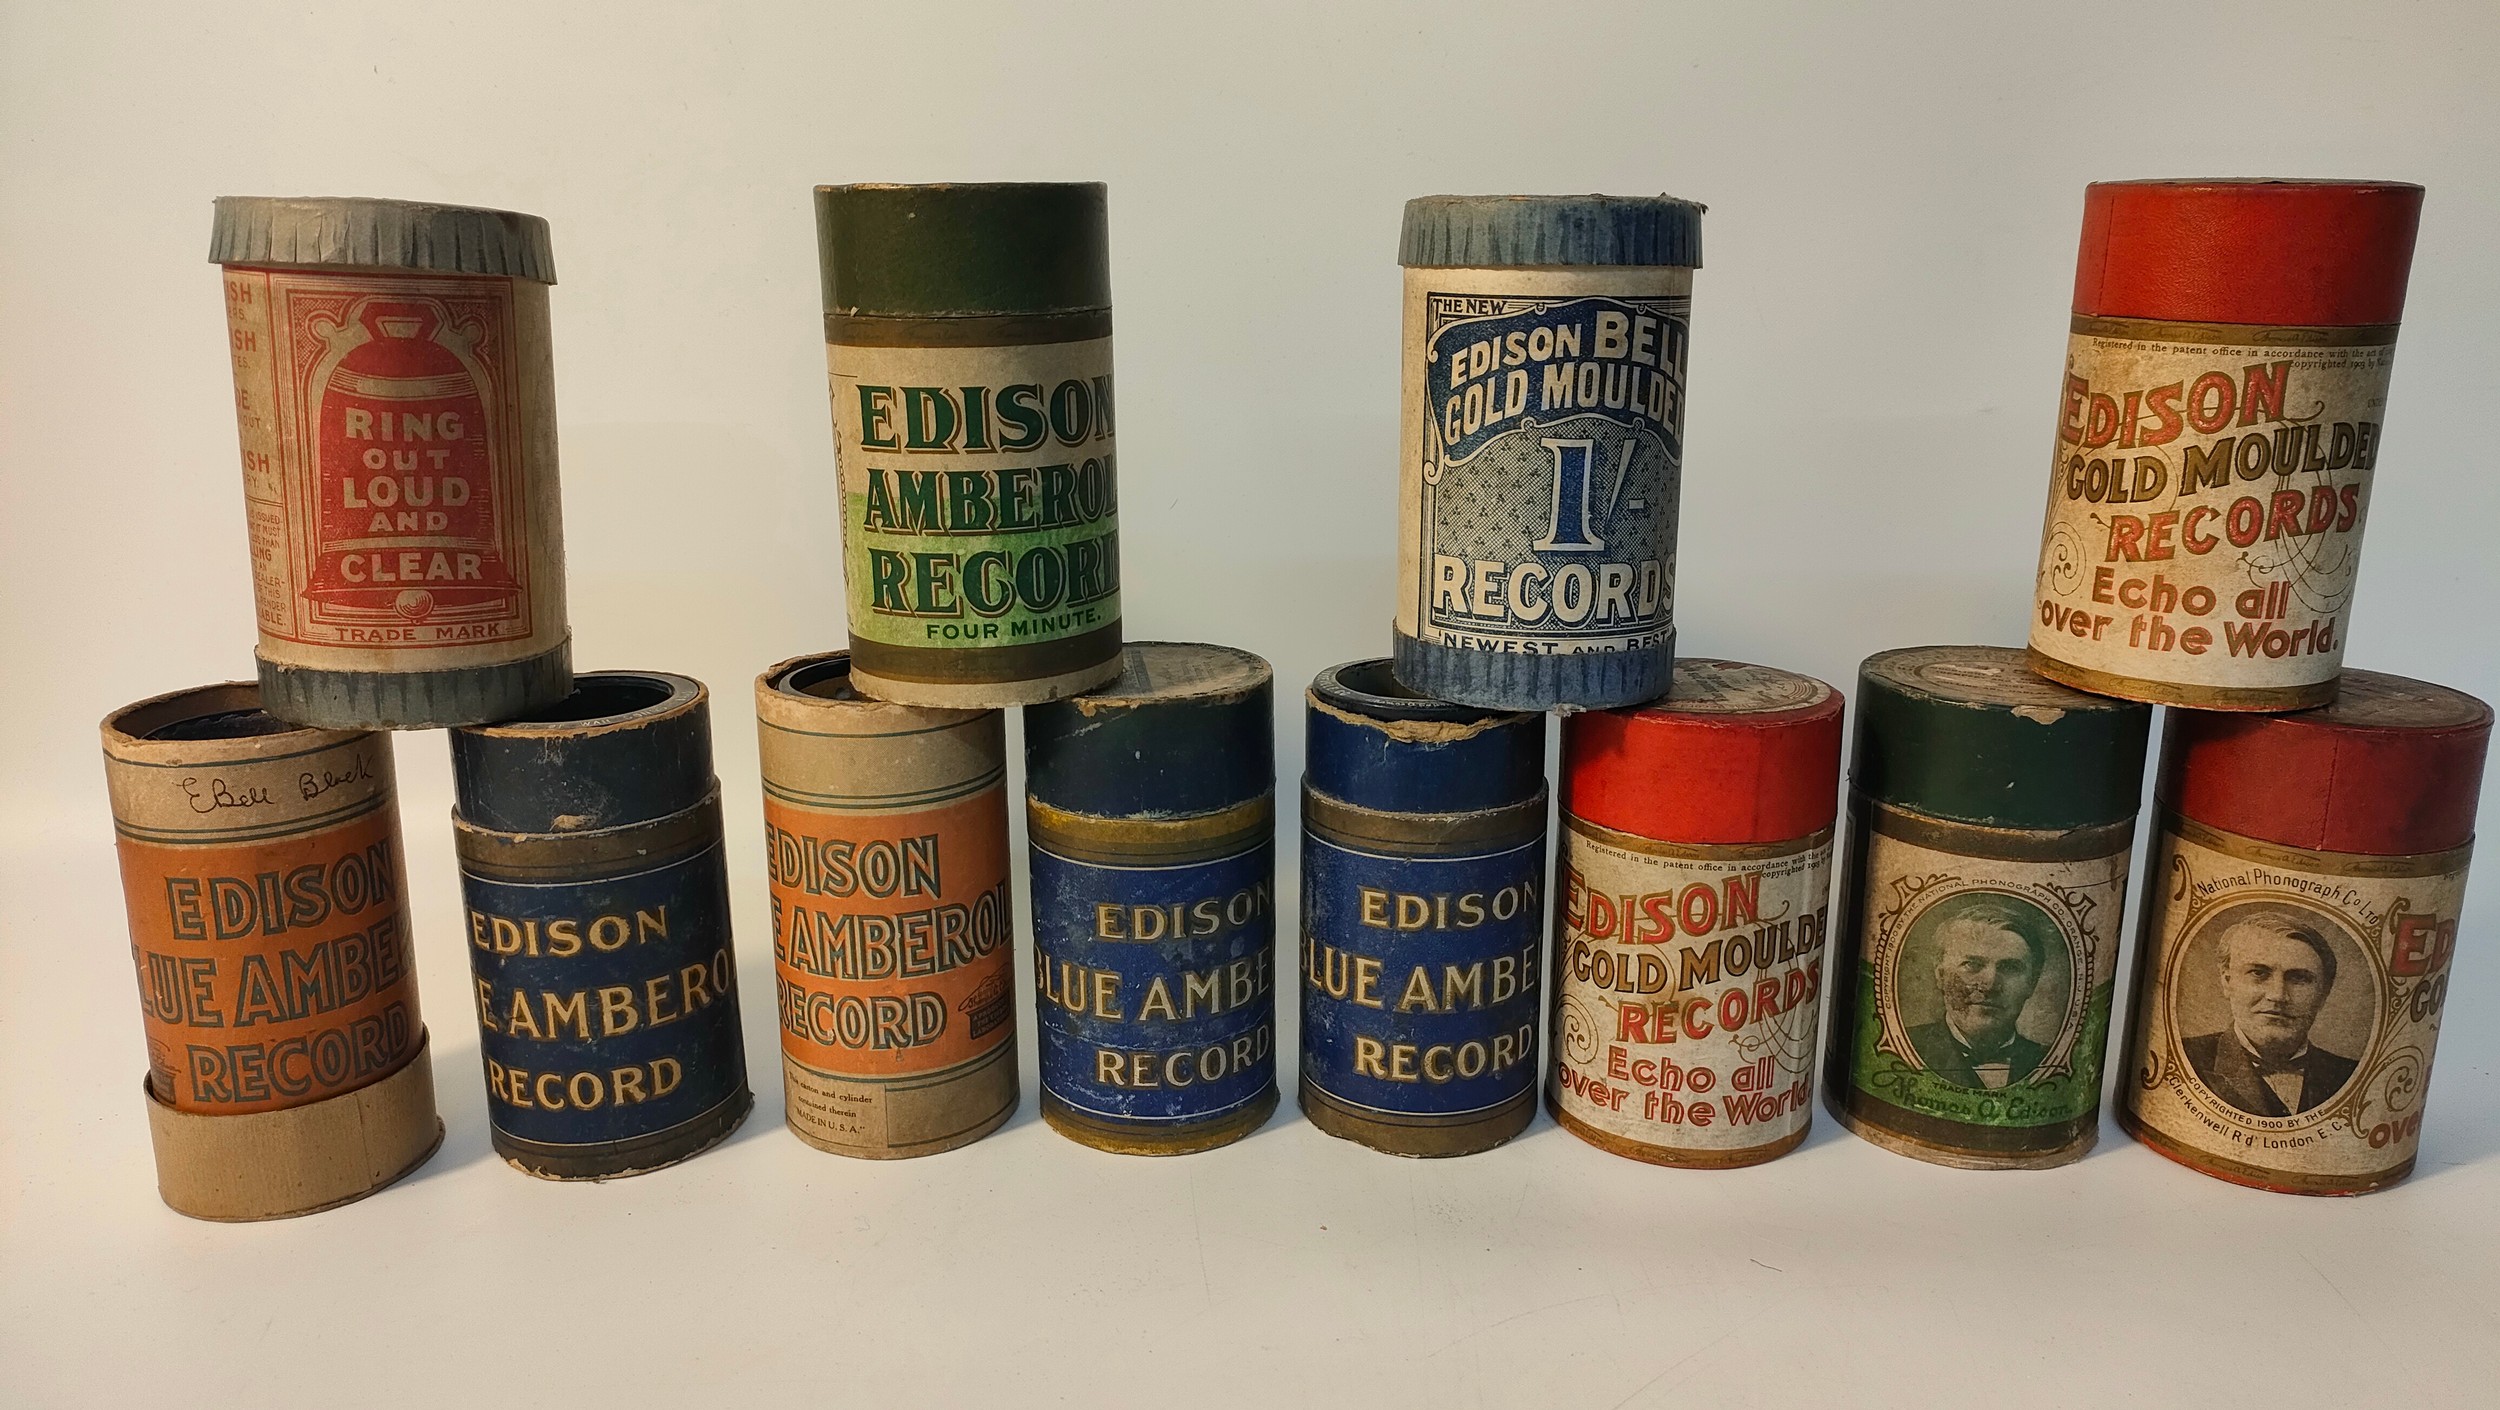 Twelve antique phonograph cylinders by Edison Amberol records